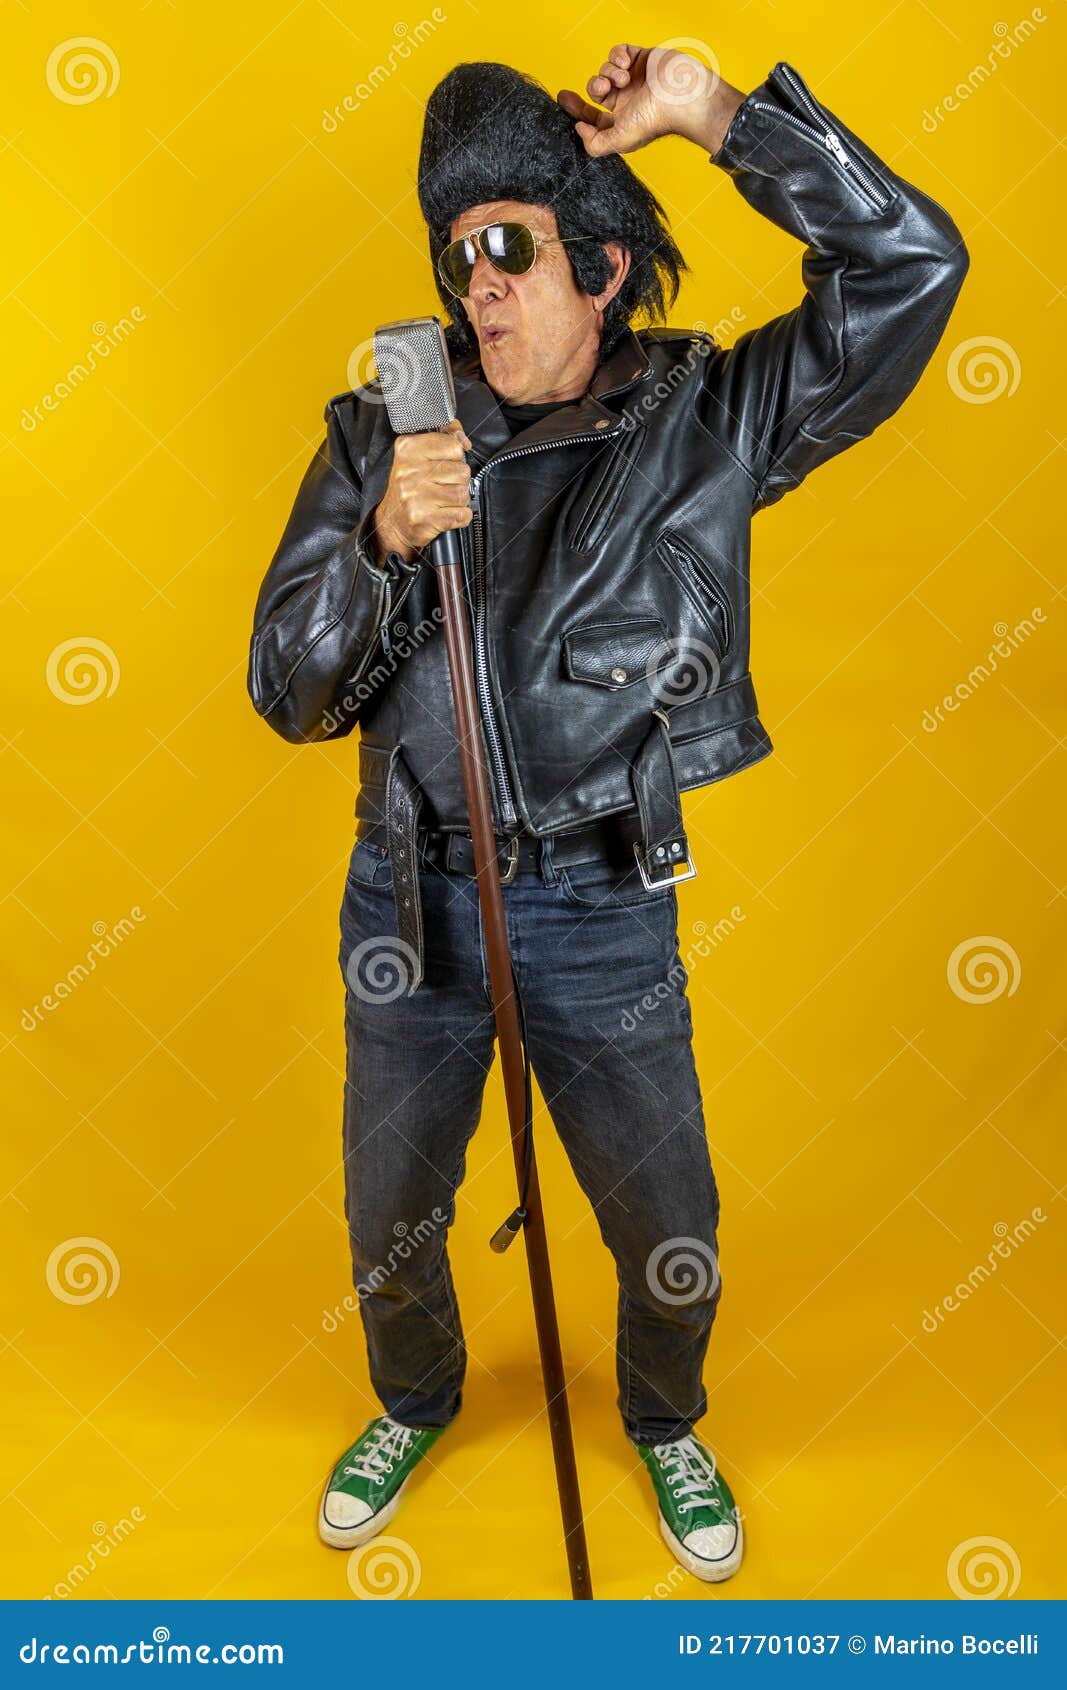 Funny Portrait of Mature Rocker. an Old Singer Dressed in Rockabilly Style  in Action Stock Image - Image of background, musician: 217701037